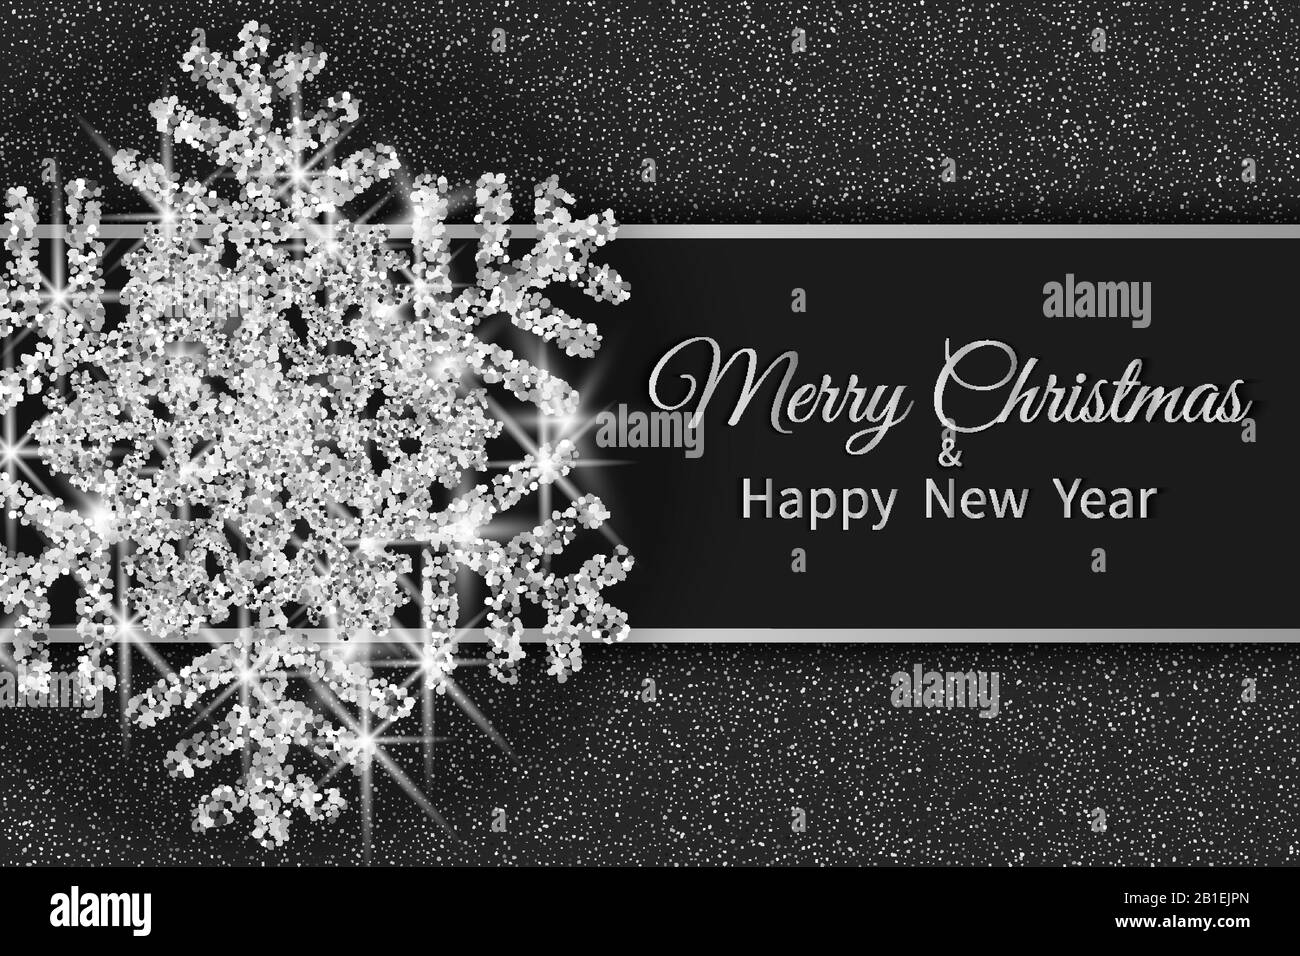 Merry Christmas greeting card. Gold snowflake and glitter on dark background. Merry Christmas and Happy New Year text. Stock Vector